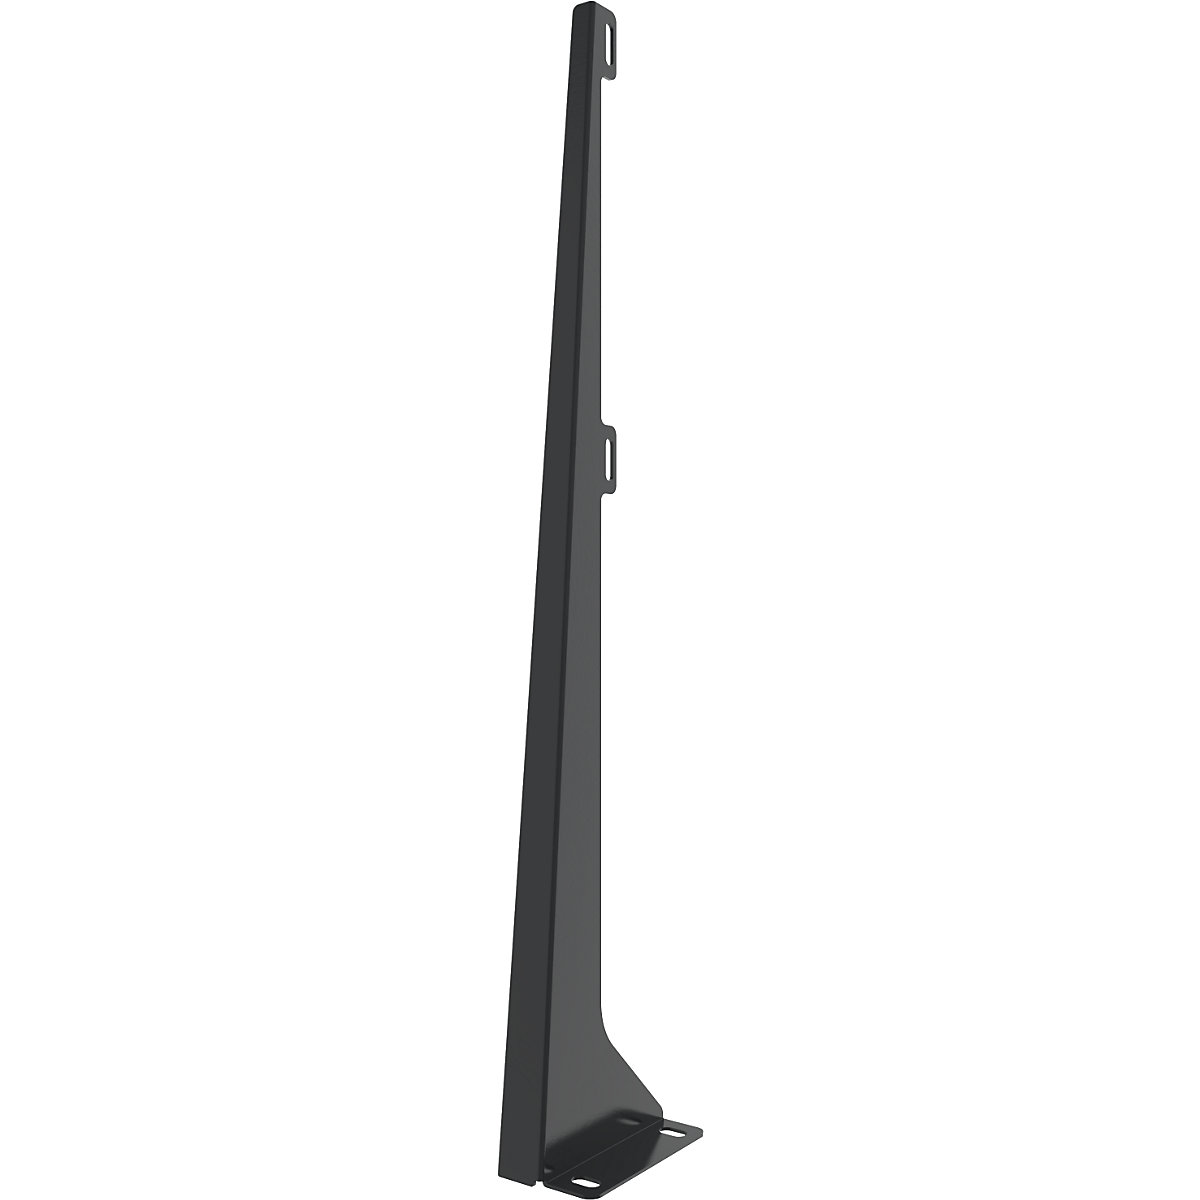 X-STORE 2.0 support upright for element height 1100 mm - Axelent